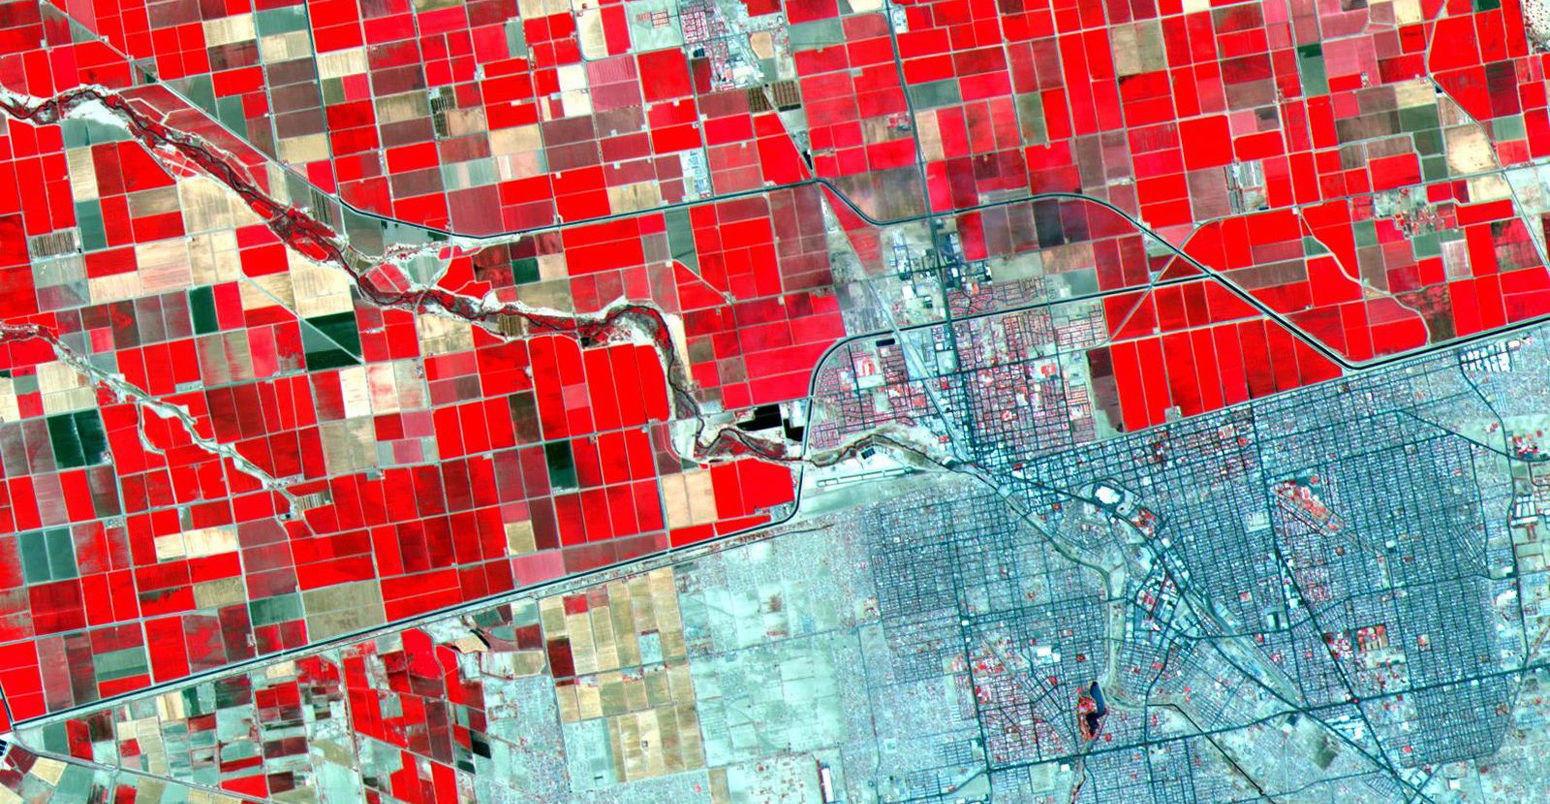 Satellite image showing the Dramatic differences in land use patterns on the US - Mexico border. Lush, regularly gridded agricultural fields on the U.S. side contrast with the more barren fields of Mexico.